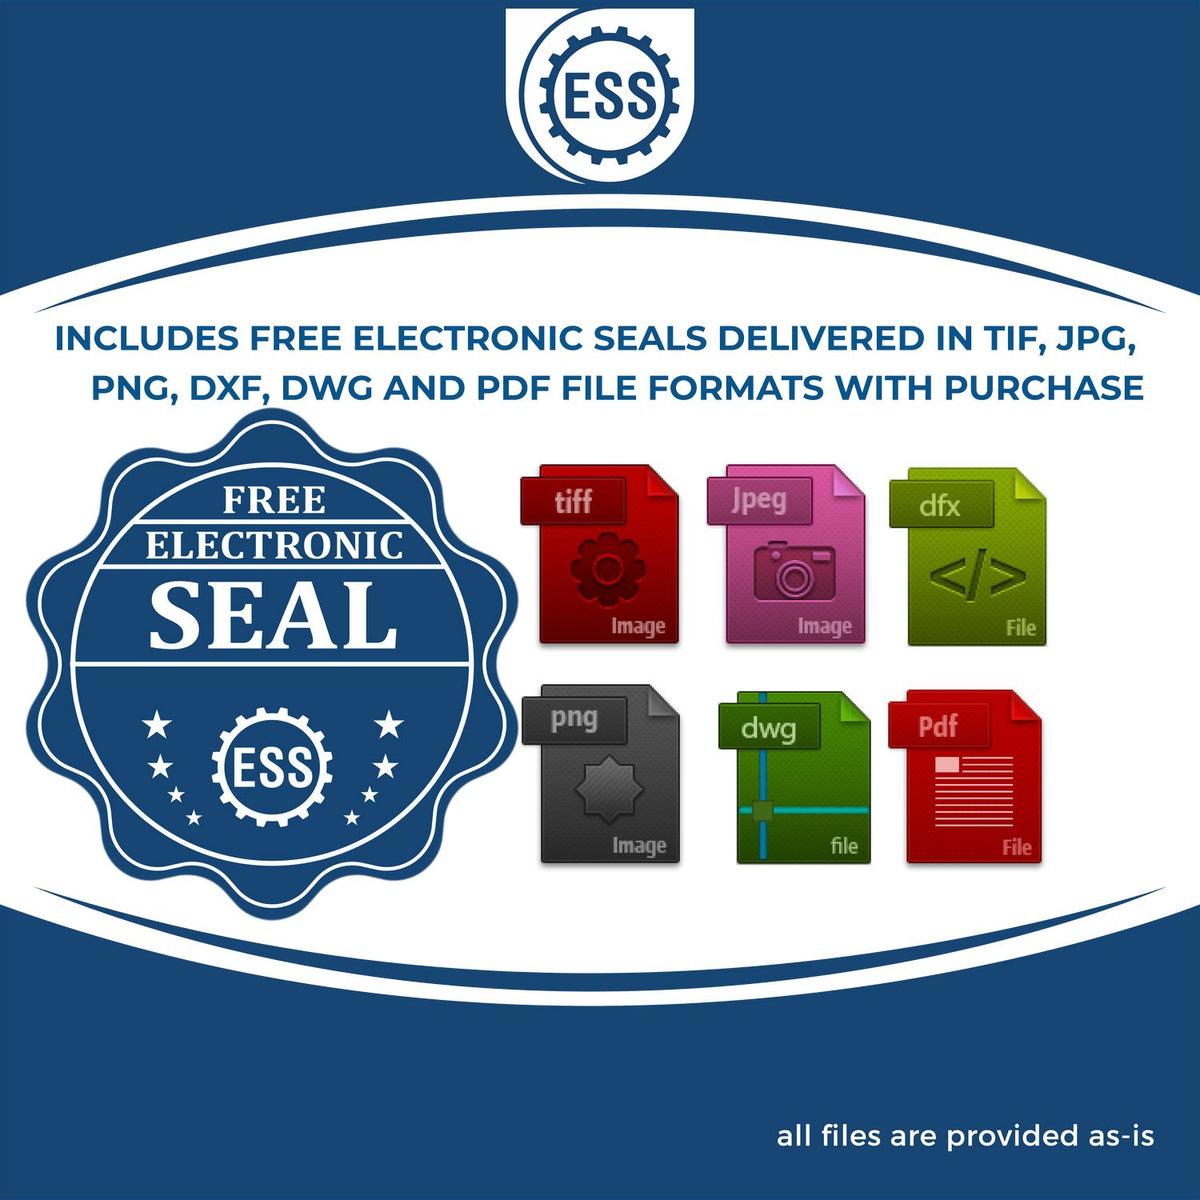 An infographic for the free electronic seal for the Slim Pre-Inked Pennsylvania Professional Geologist Seal Stamp illustrating the different file type icons such as DXF, DWG, TIF, JPG and PNG.